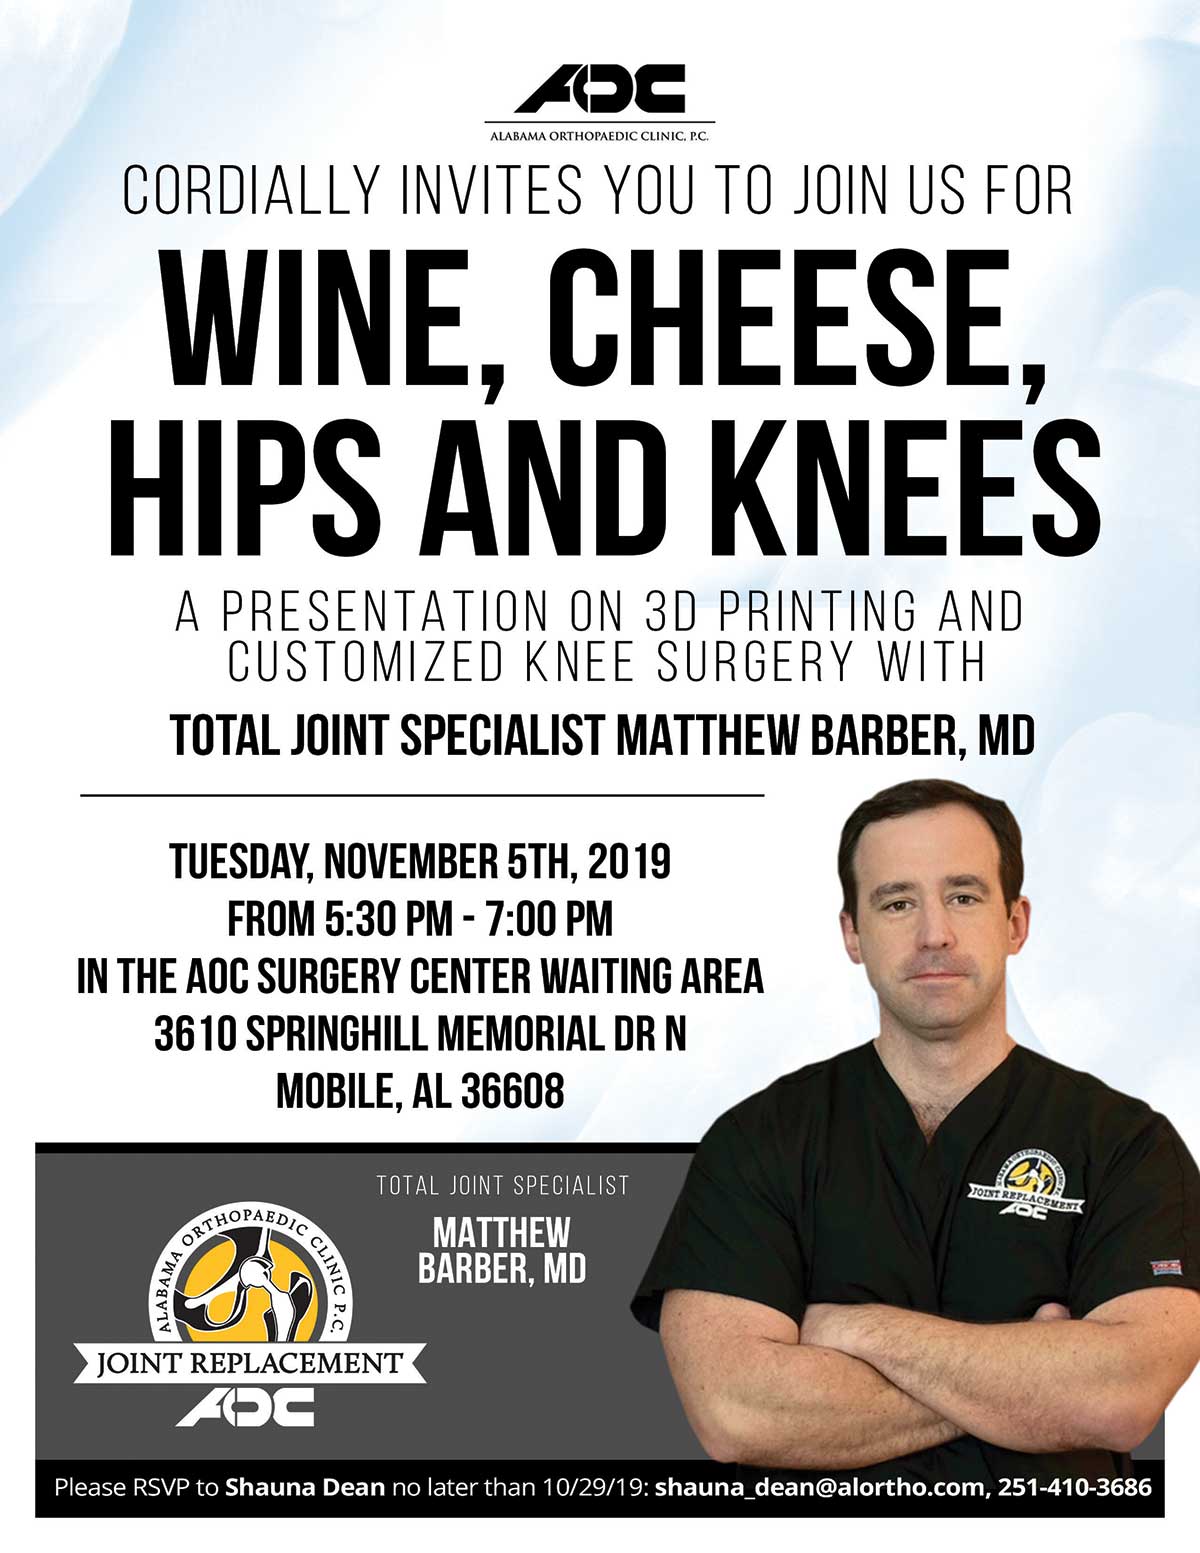 "Wine Cheese, Hips and Knees" with Dr. Matt Barber - event flyer